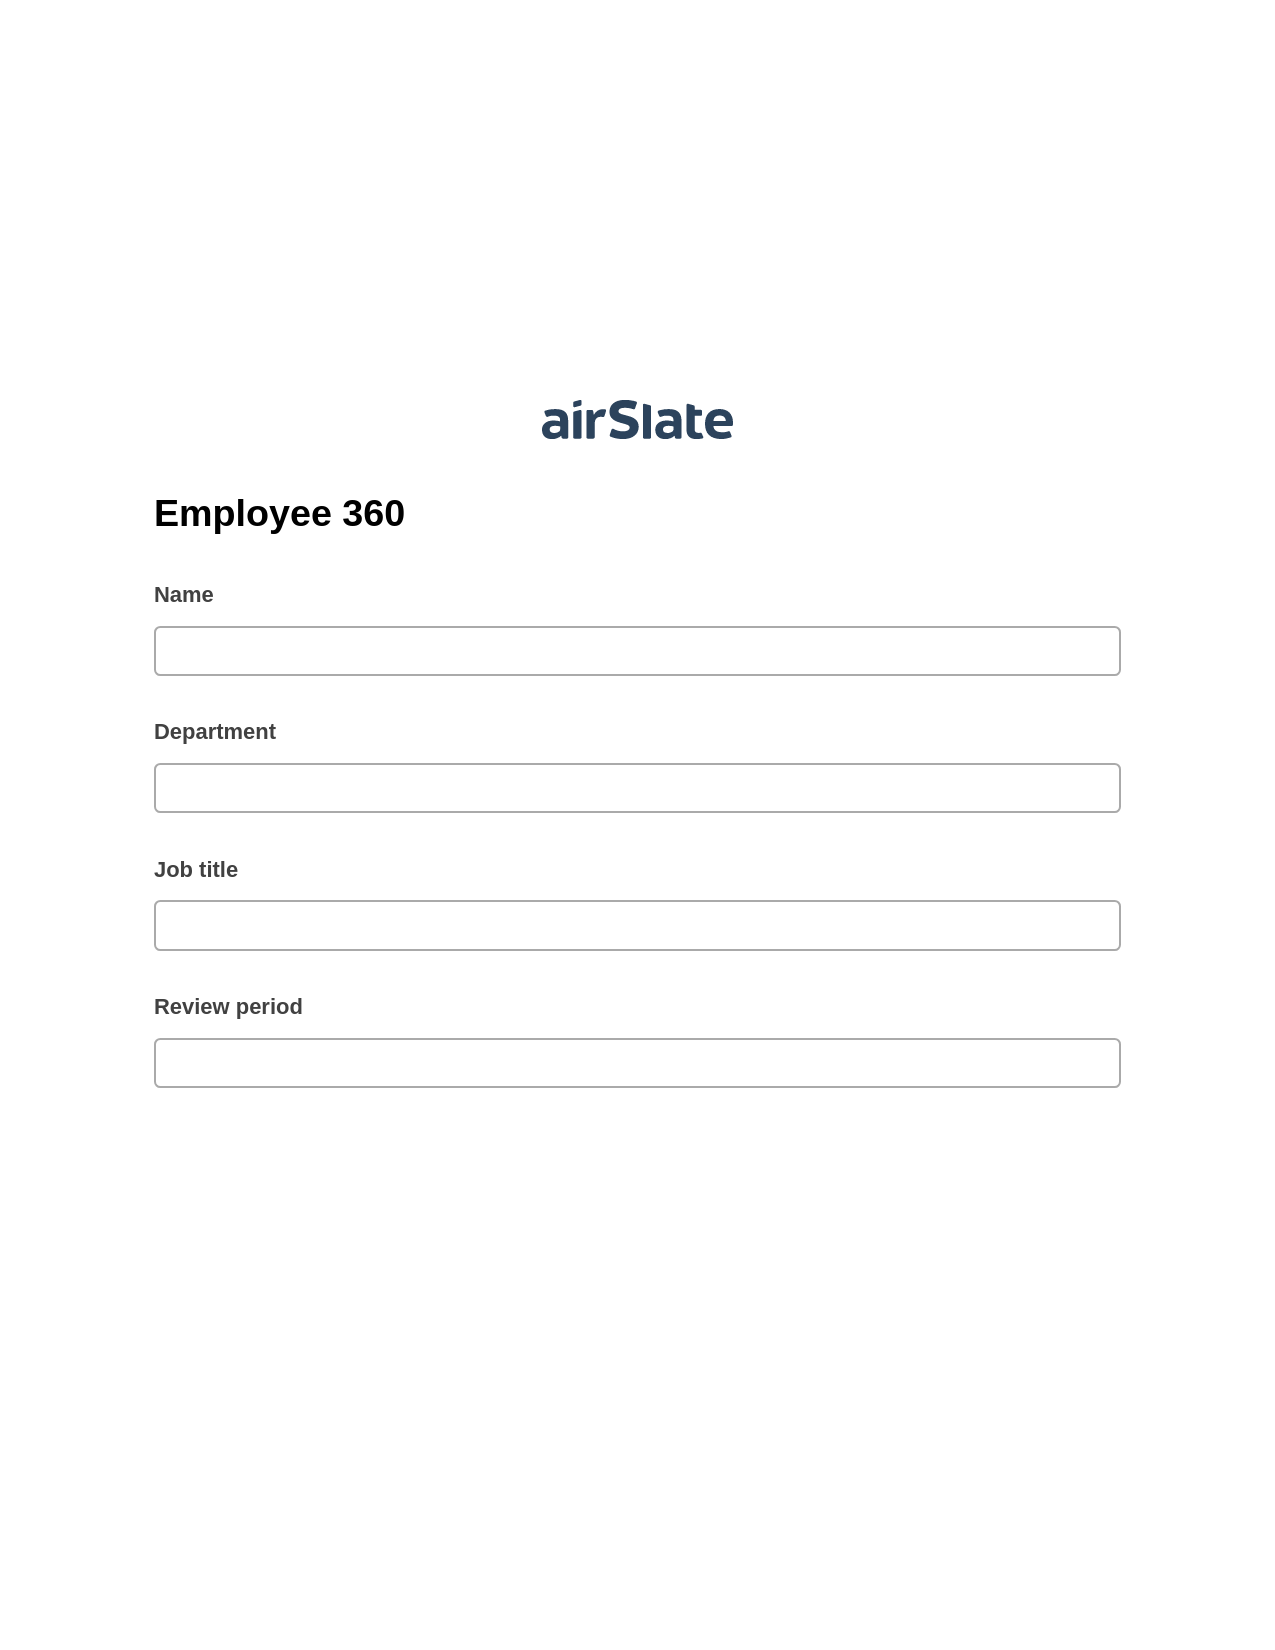 Employee 360 Pre-fill from Excel Spreadsheet Bot, Invoke Salesforce Process Bot, Archive to SharePoint Folder Bot